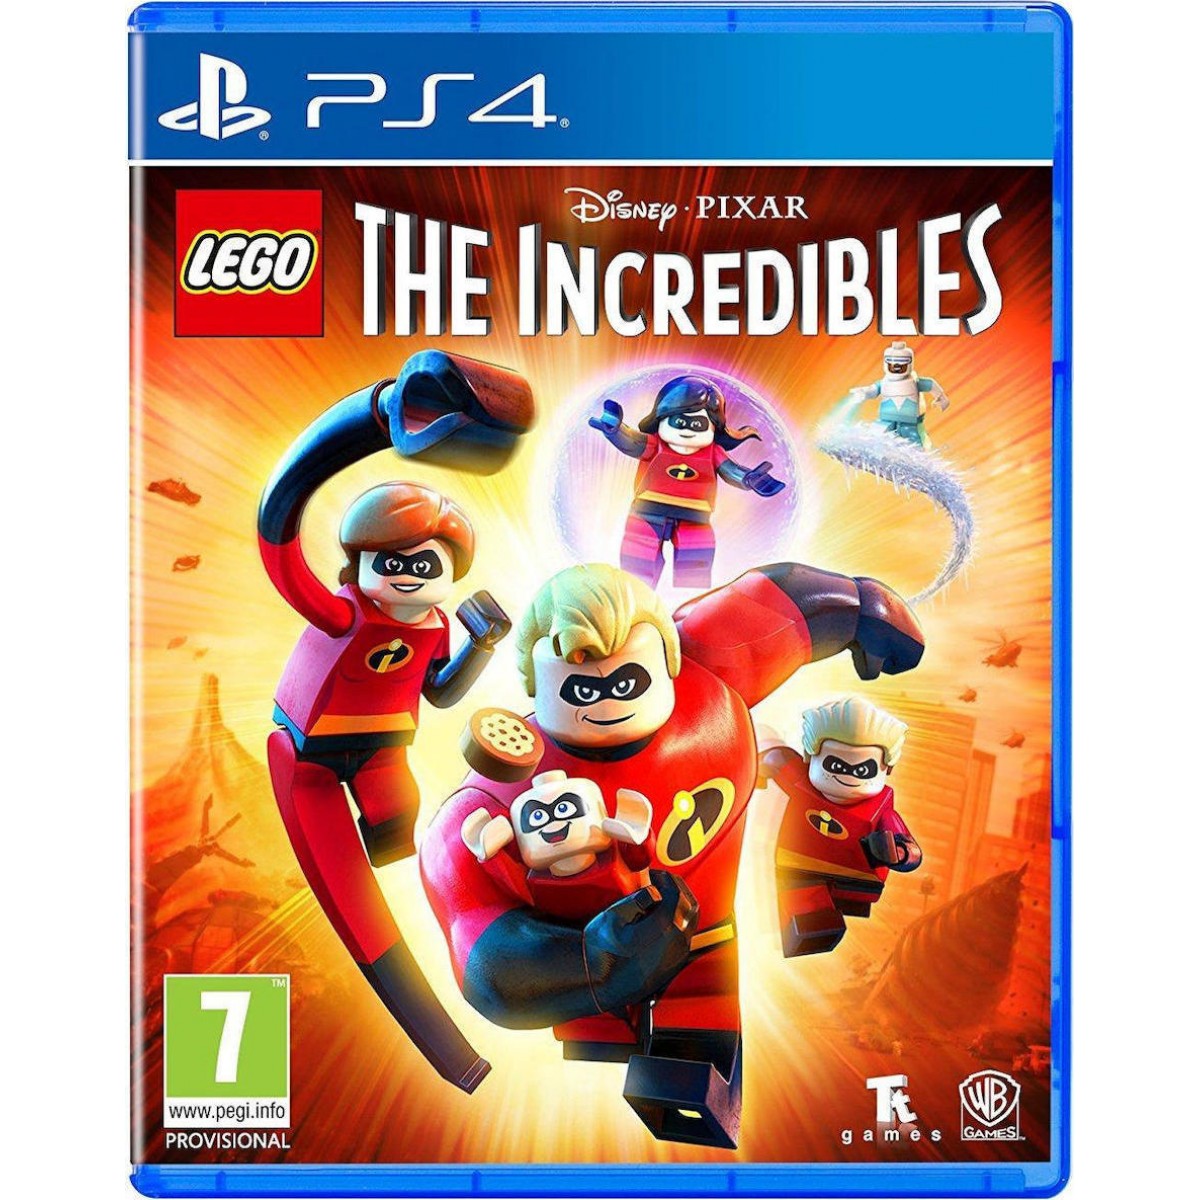 PS4 LEGO INCREDIBLES GAME